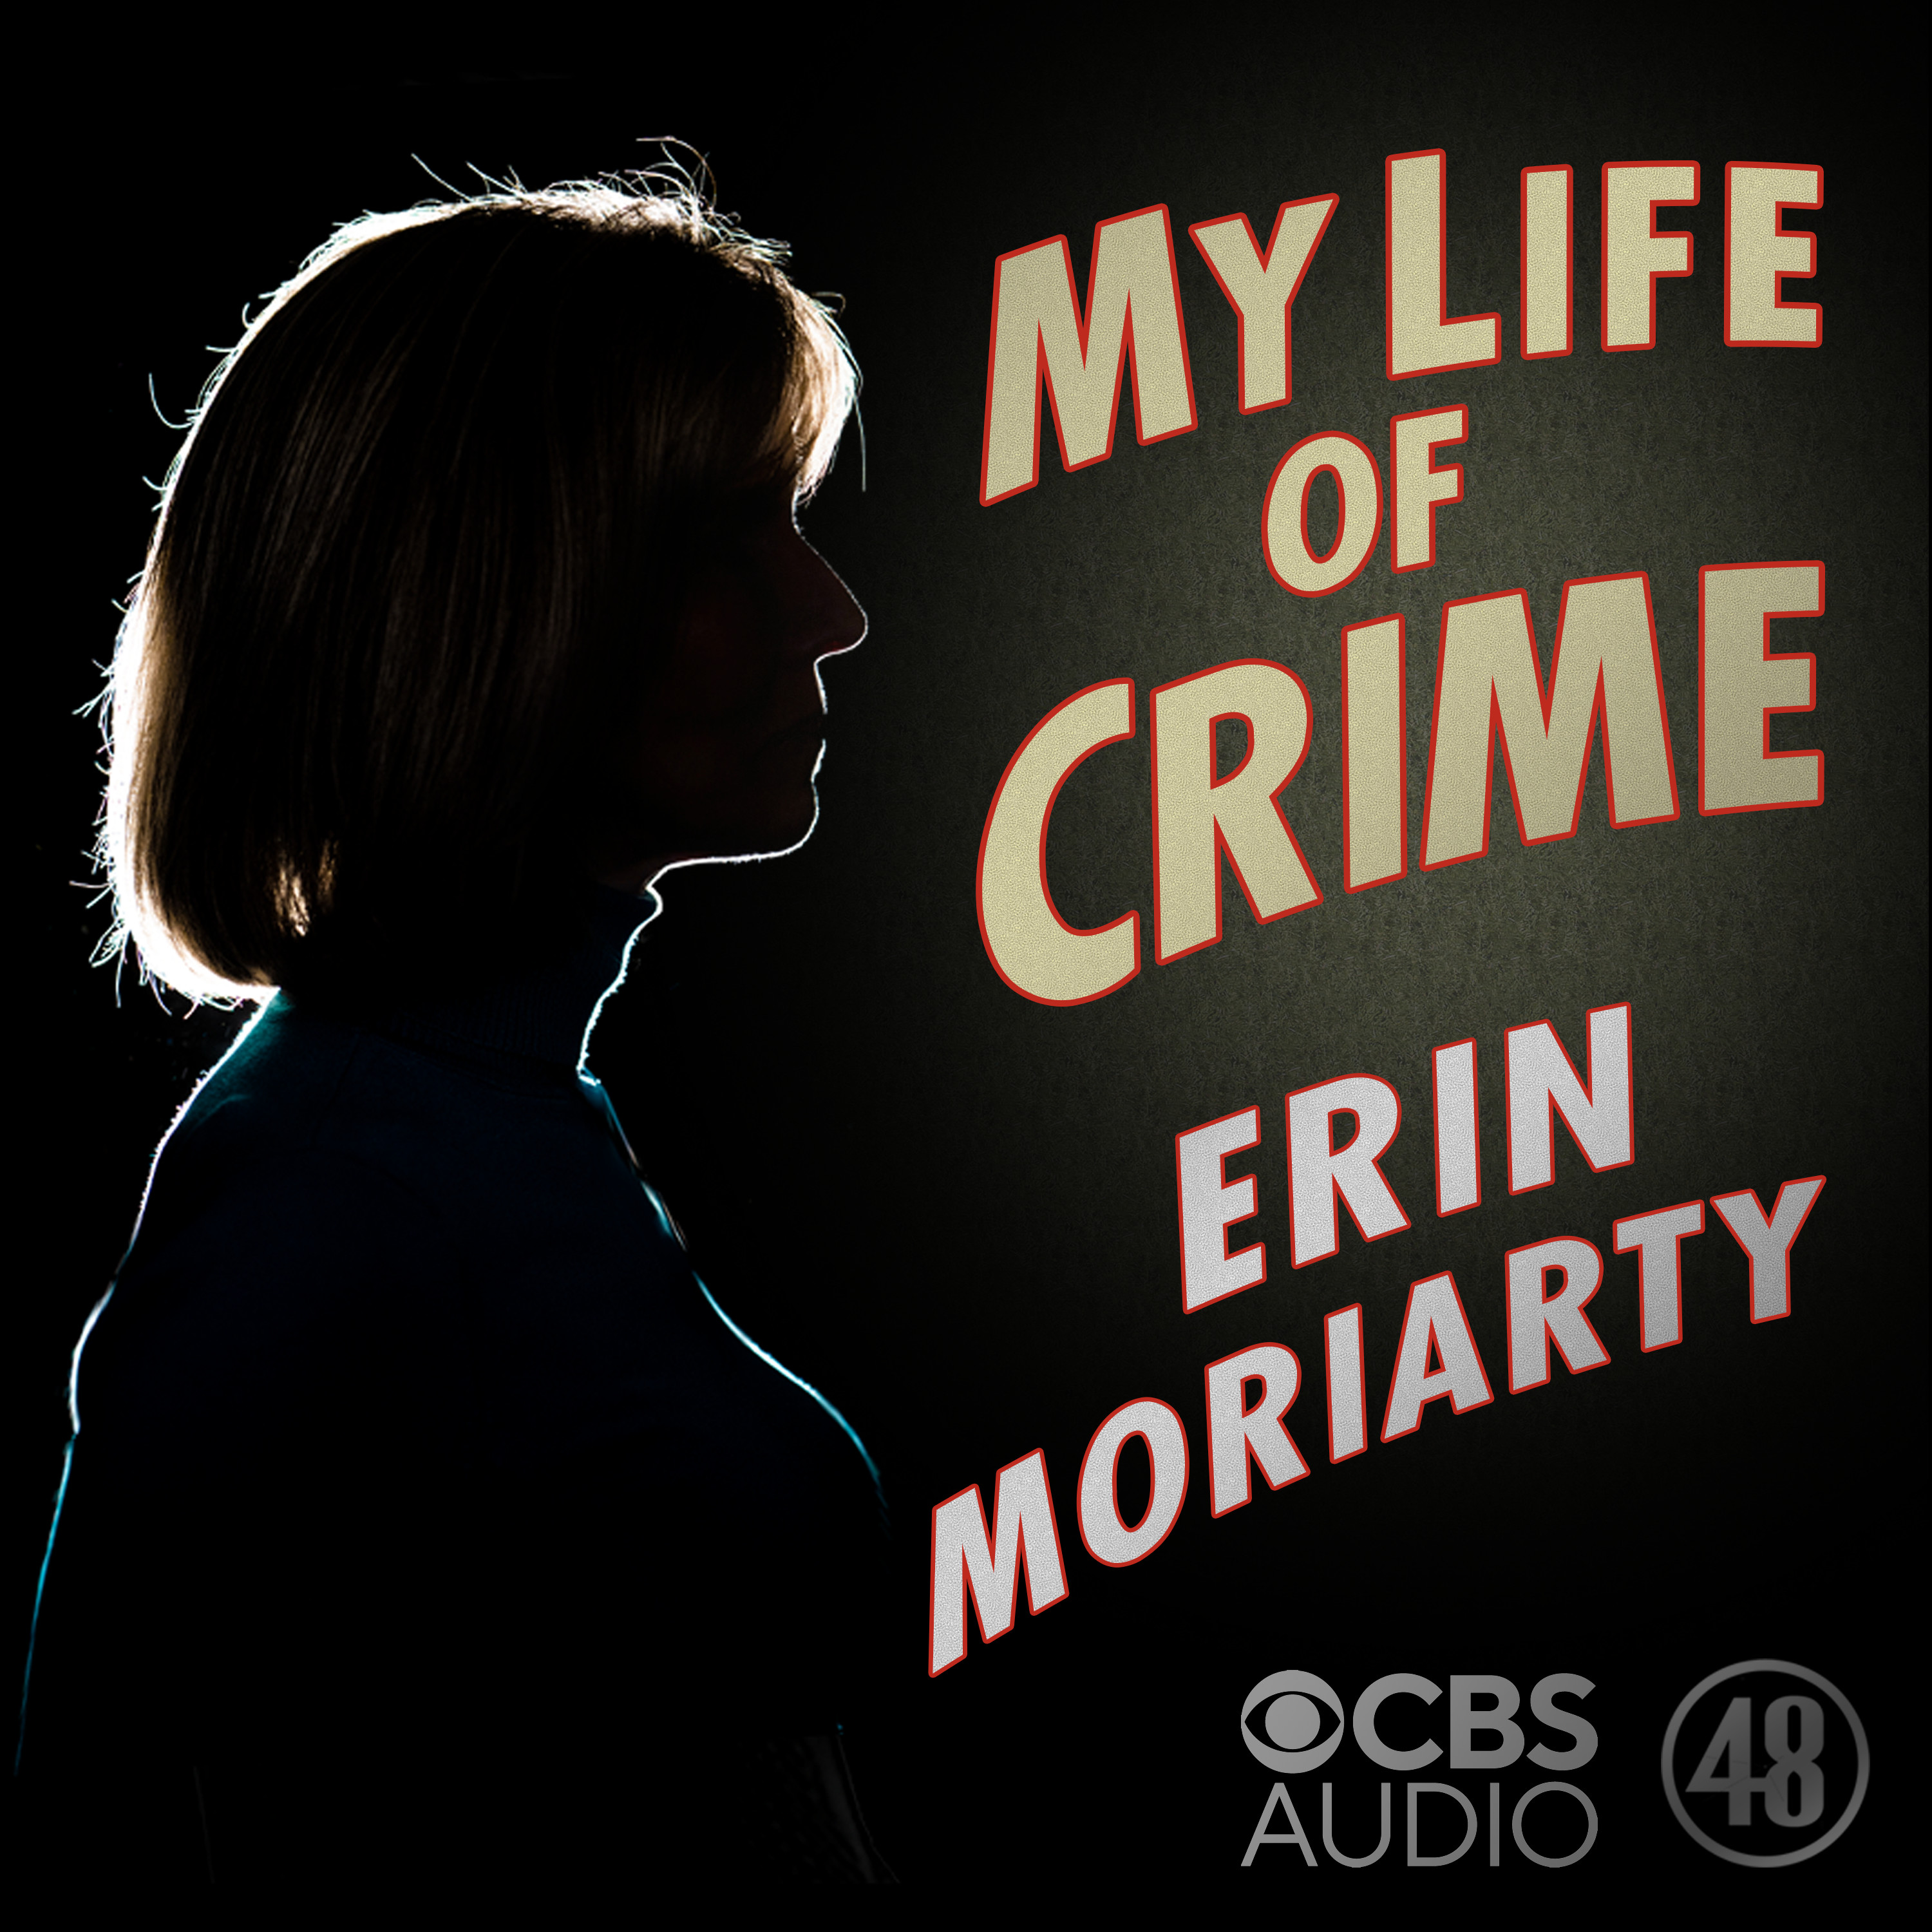 My Life of Crime with Erin Moriarty